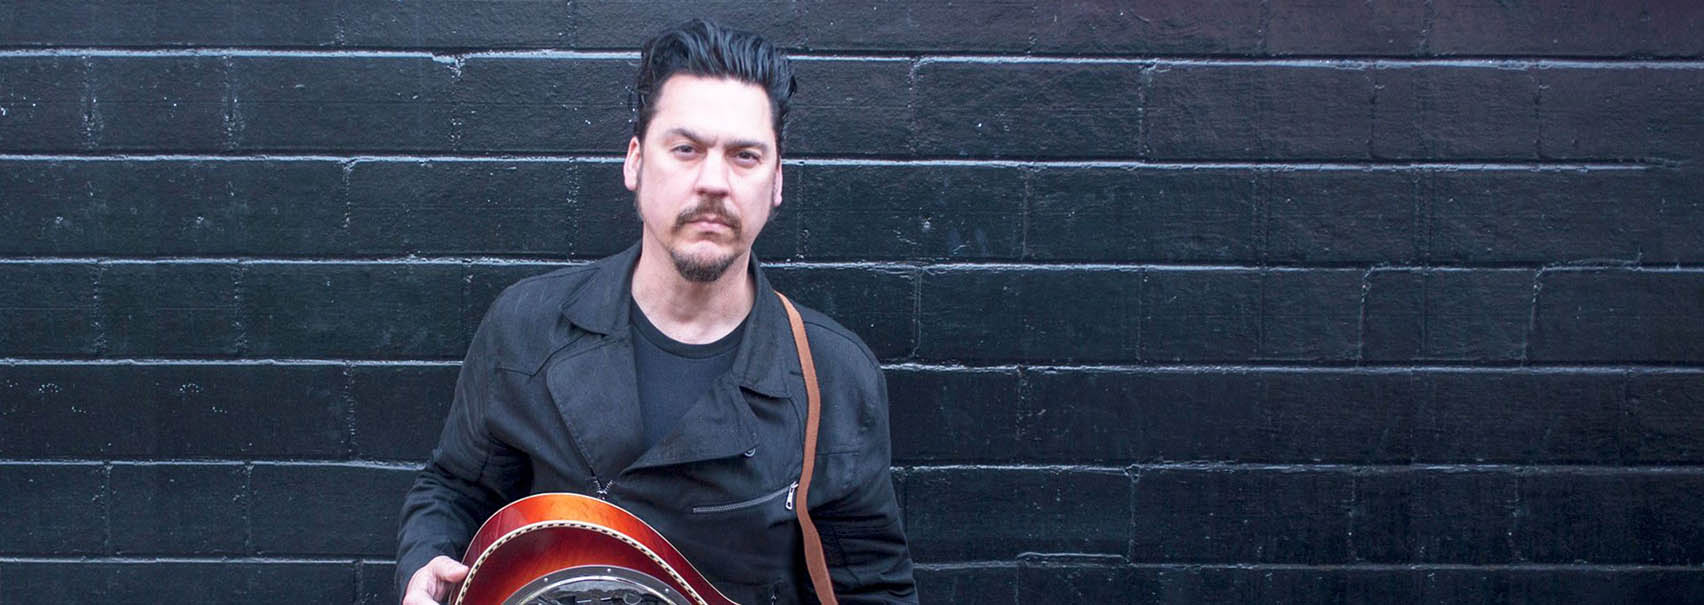 Listen to Jesse Dayton on SiriusXM's Outlaw Country Aug 2 at 9 p.m. (EST)!